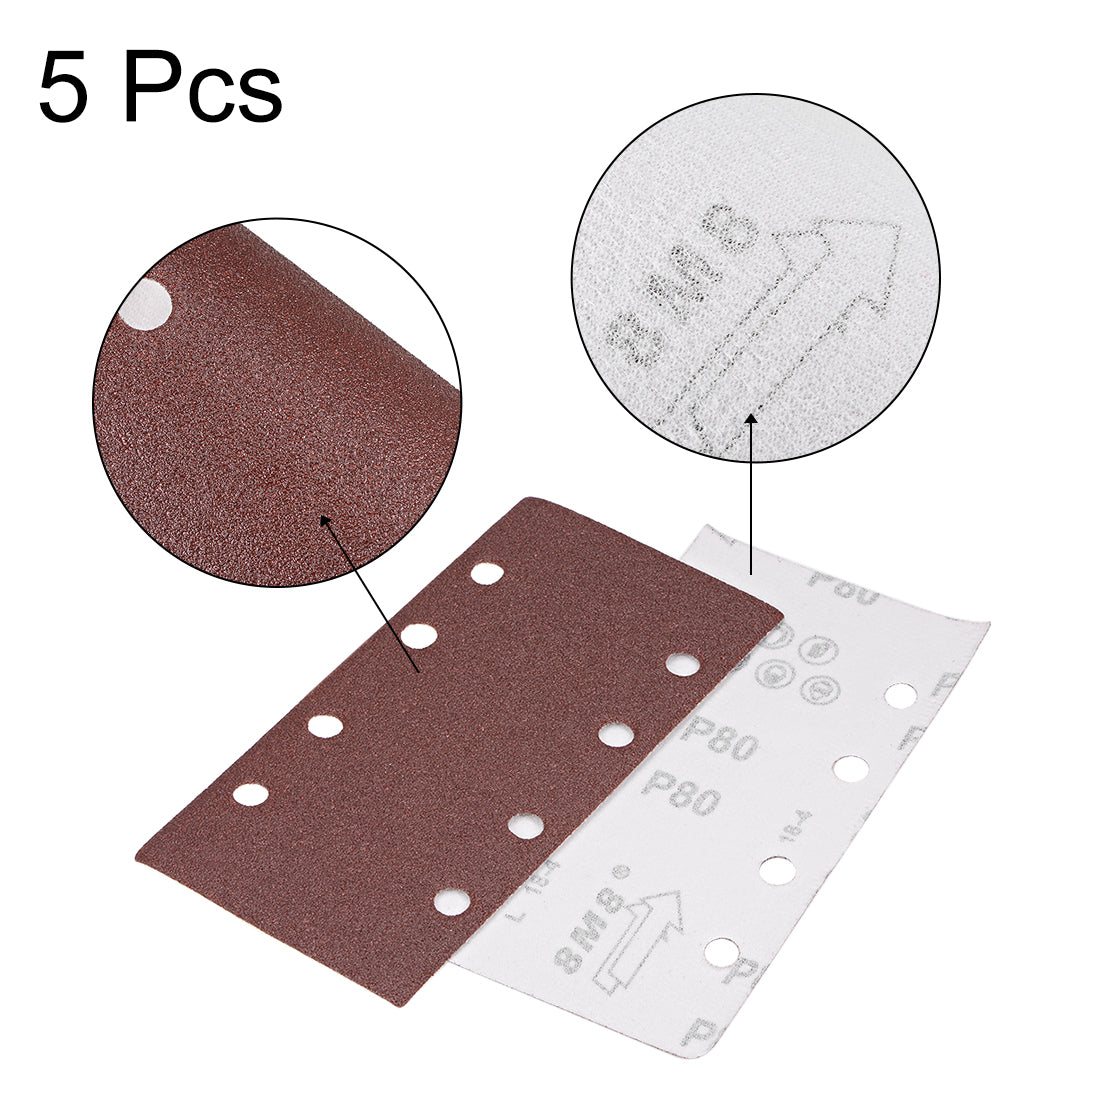 Uxcell Uxcell 240-Grits 8-Holes Hook and Loop Sanding Sheet, 7.3 x 3.6-inch Wet Dry Aluminum Oxide Sandpaper for Sander 5pcs